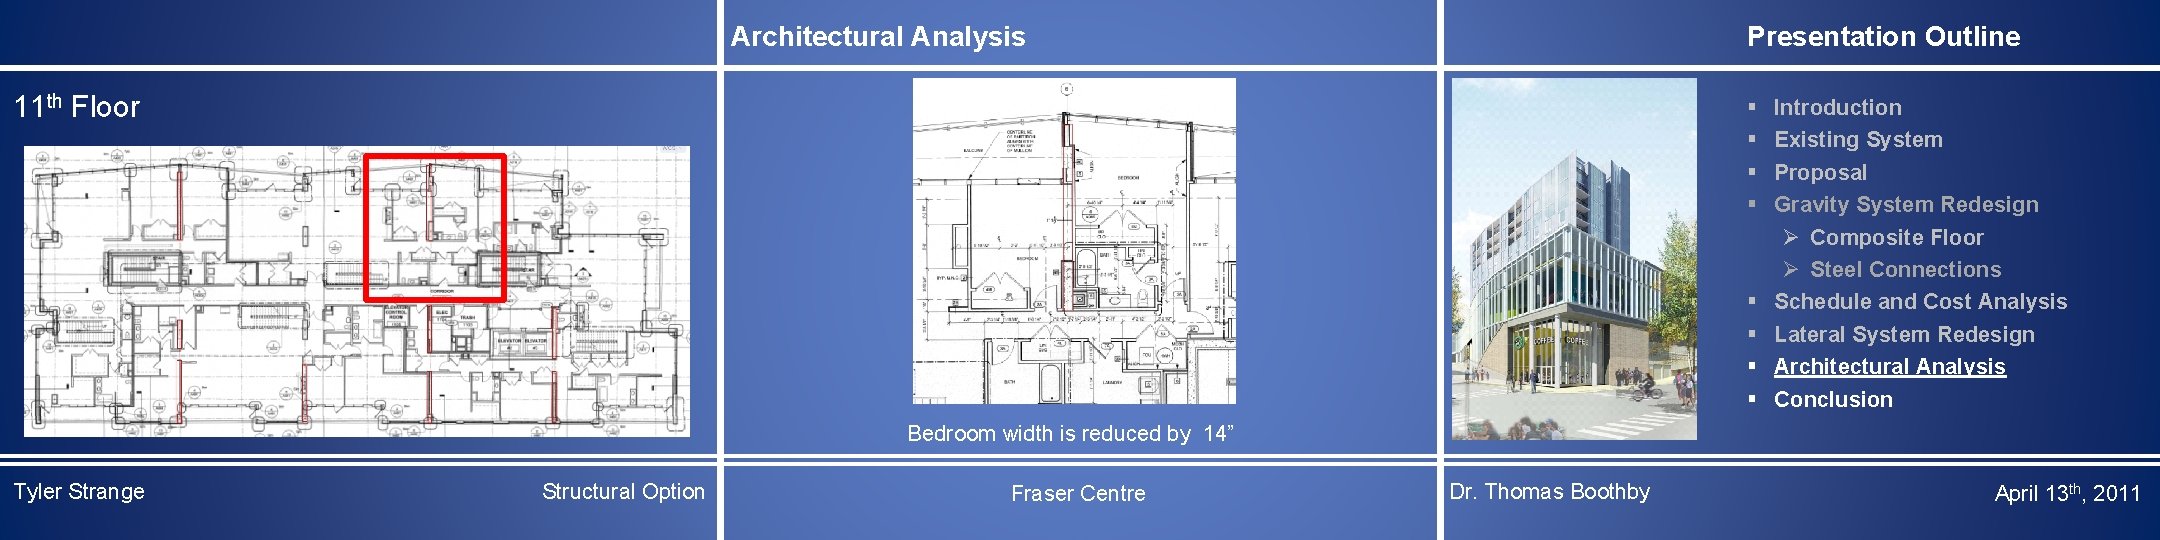 Presentation Outline Architectural Analysis 11 th Floor § § § § Introduction Existing System